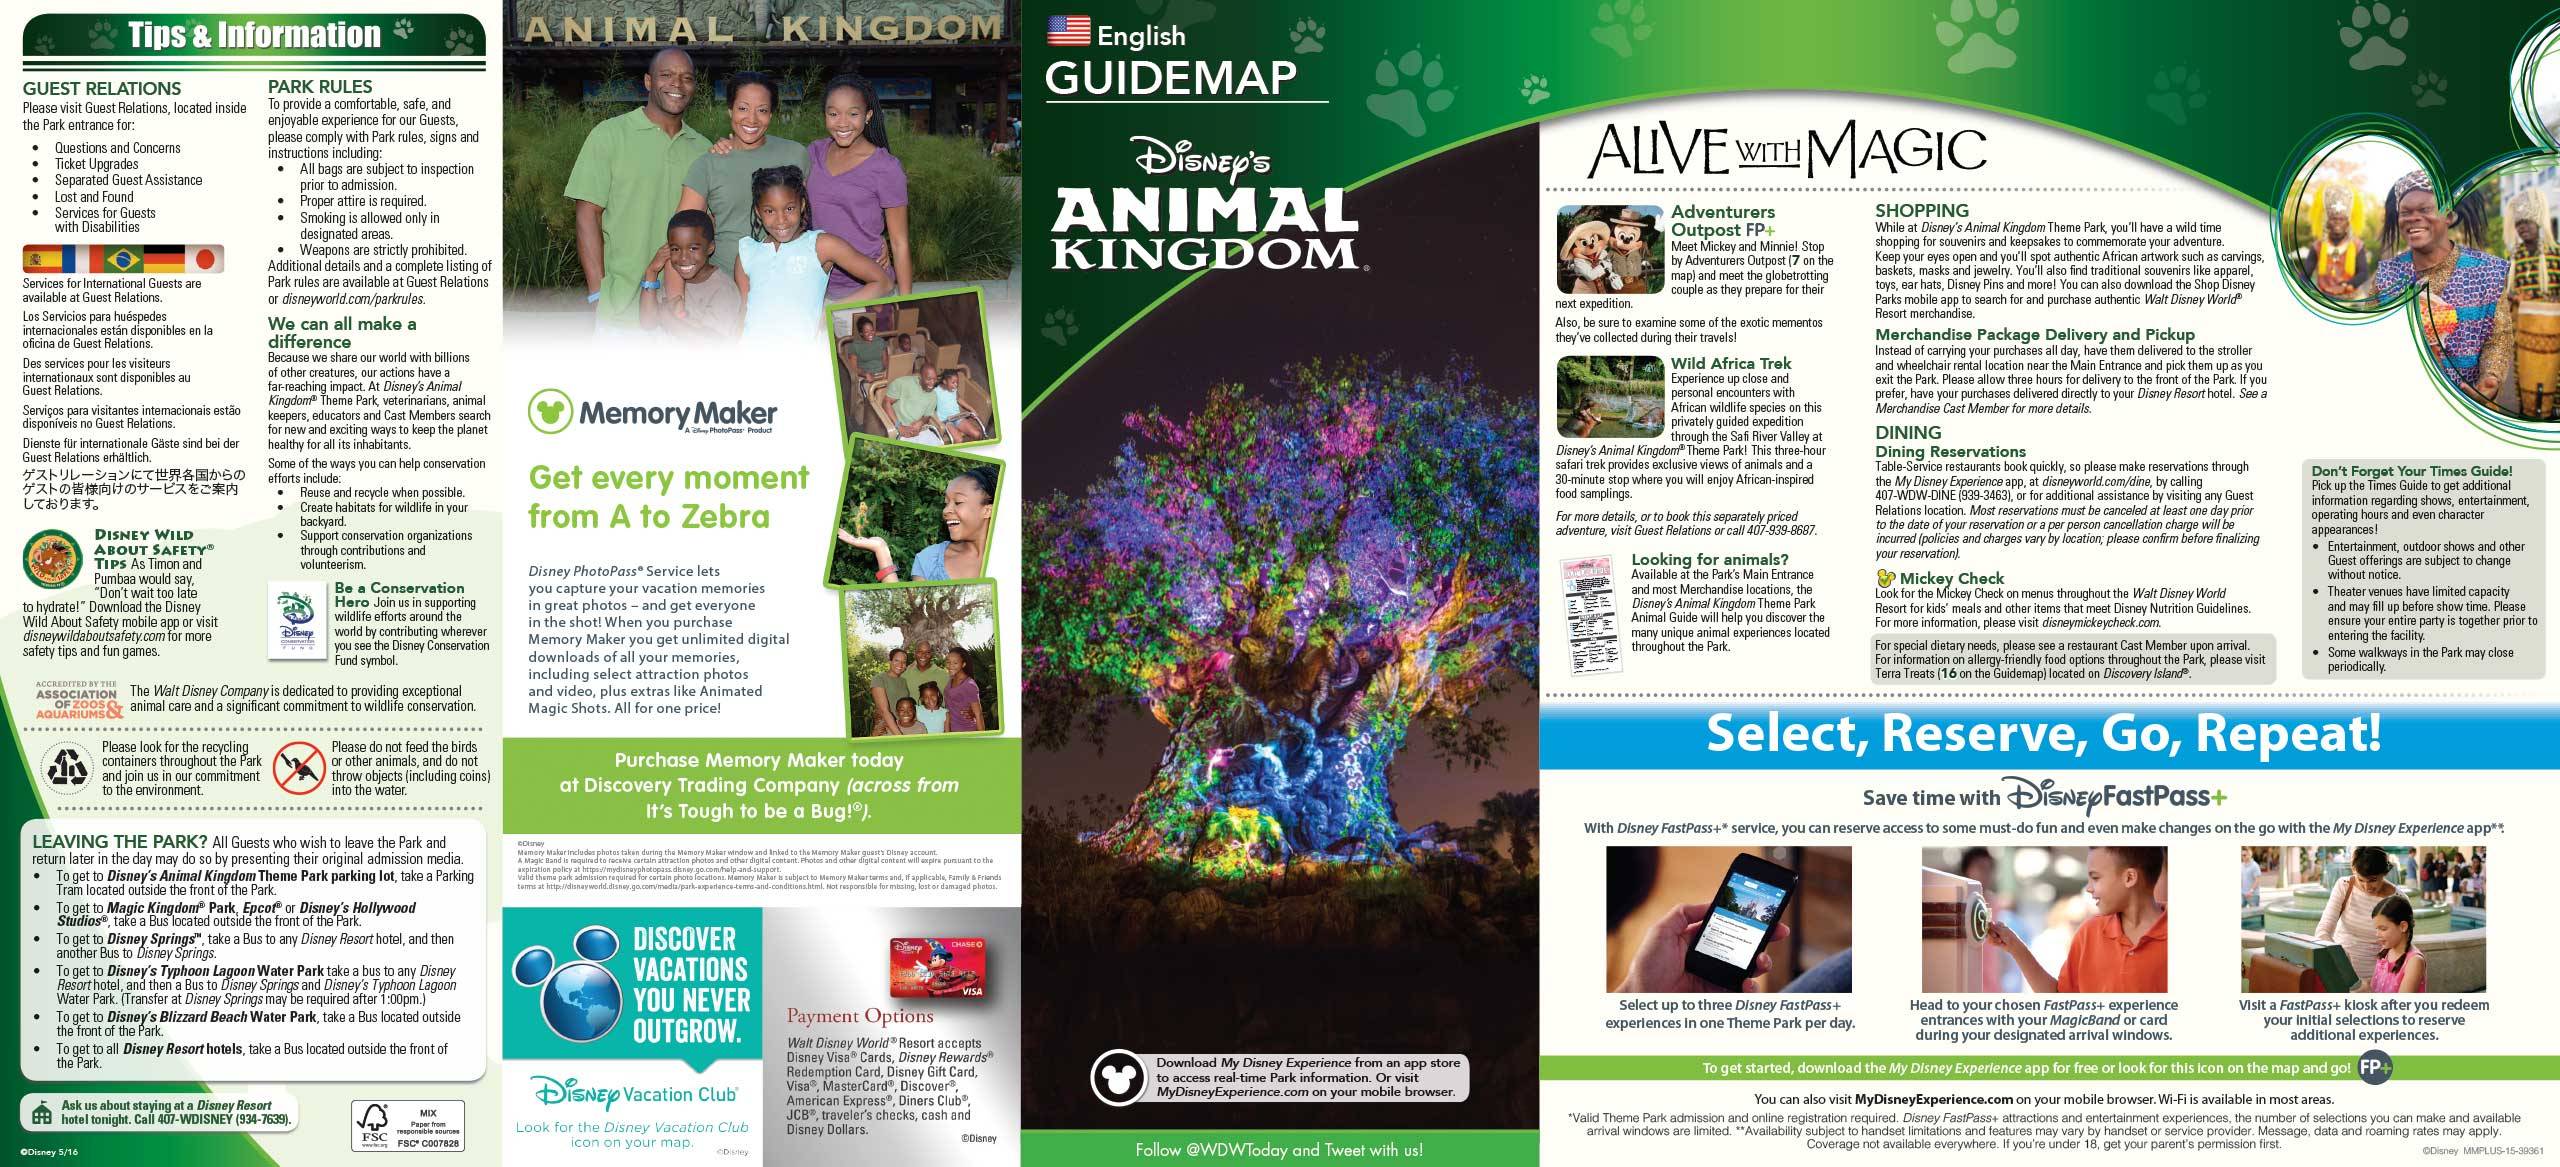 Disney's Animal Kingdom Guide Map May 2016 - Front